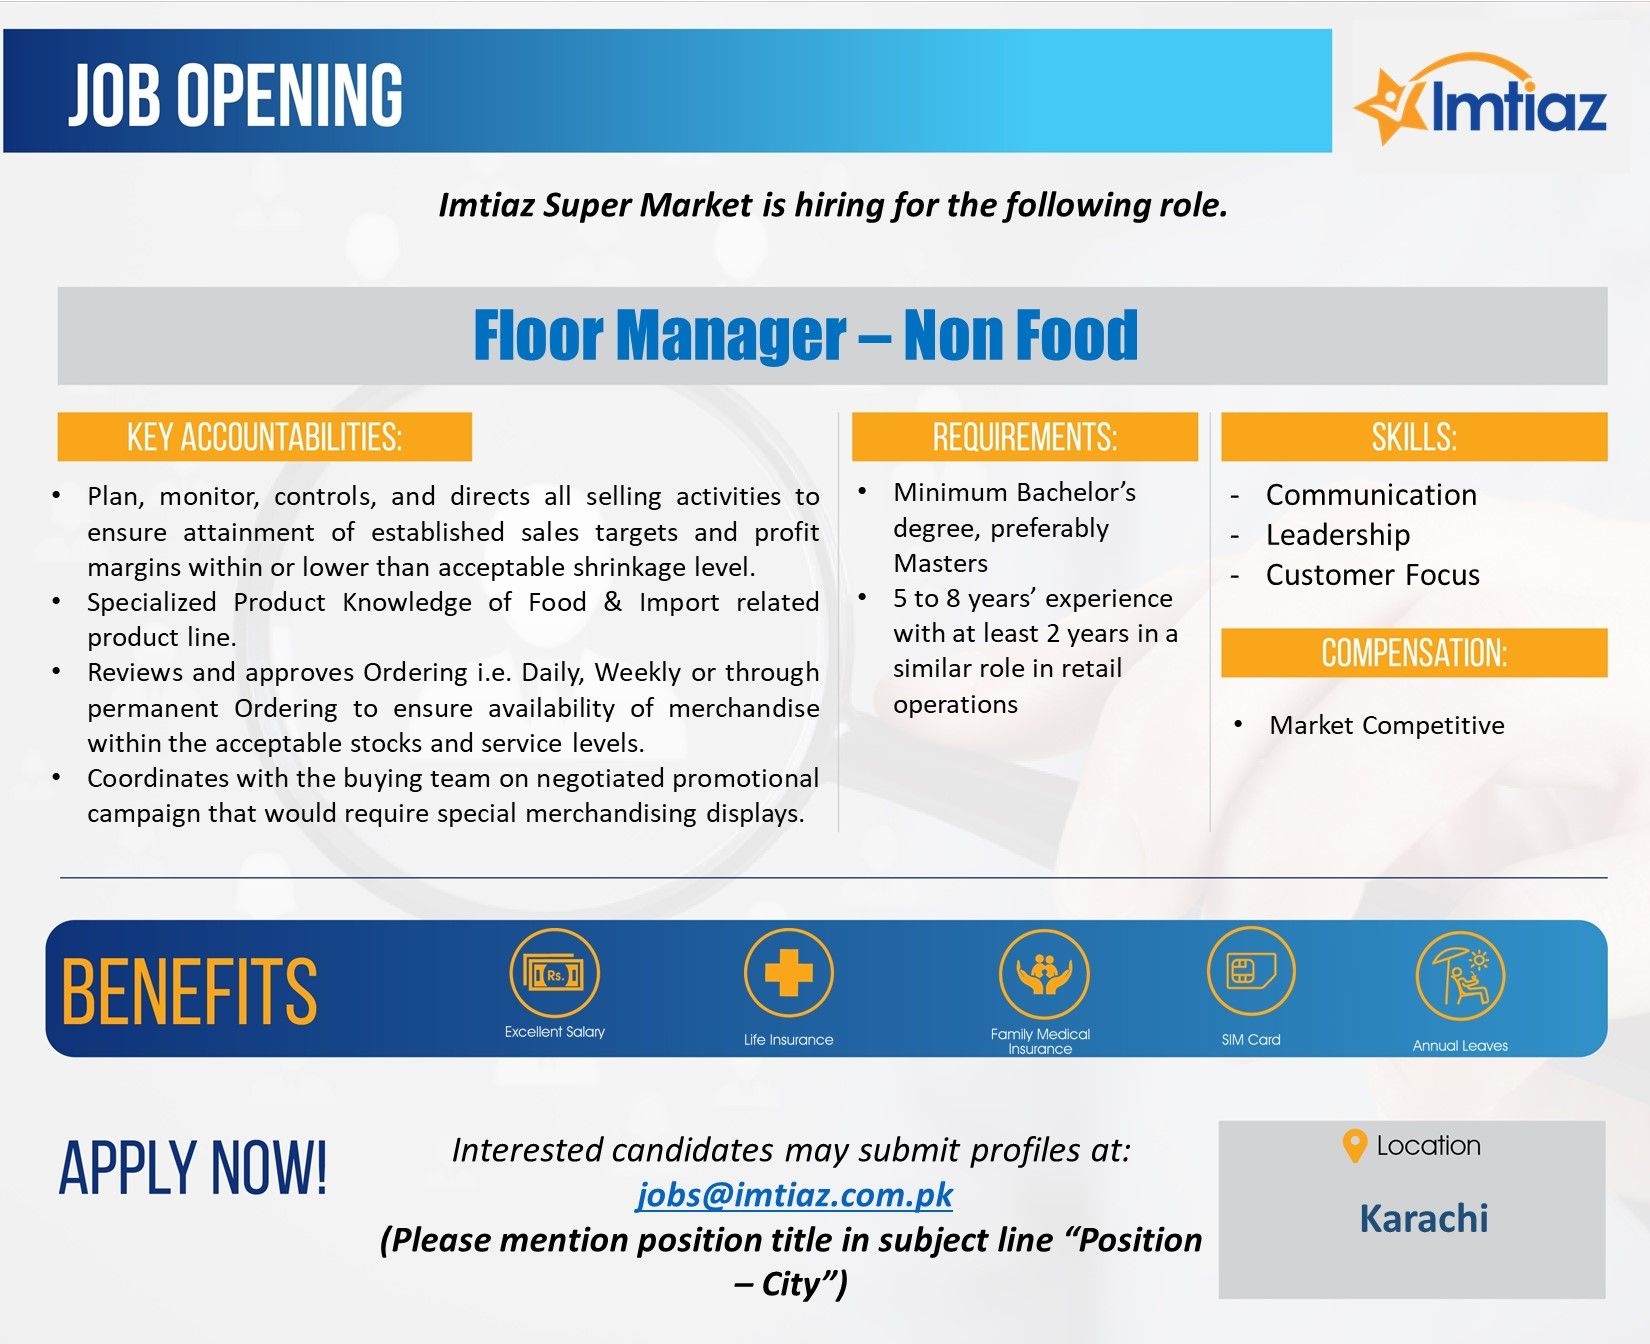 Imtiaz Super Market is seeking talented professionals for the role of Floor Manager - Non Food.